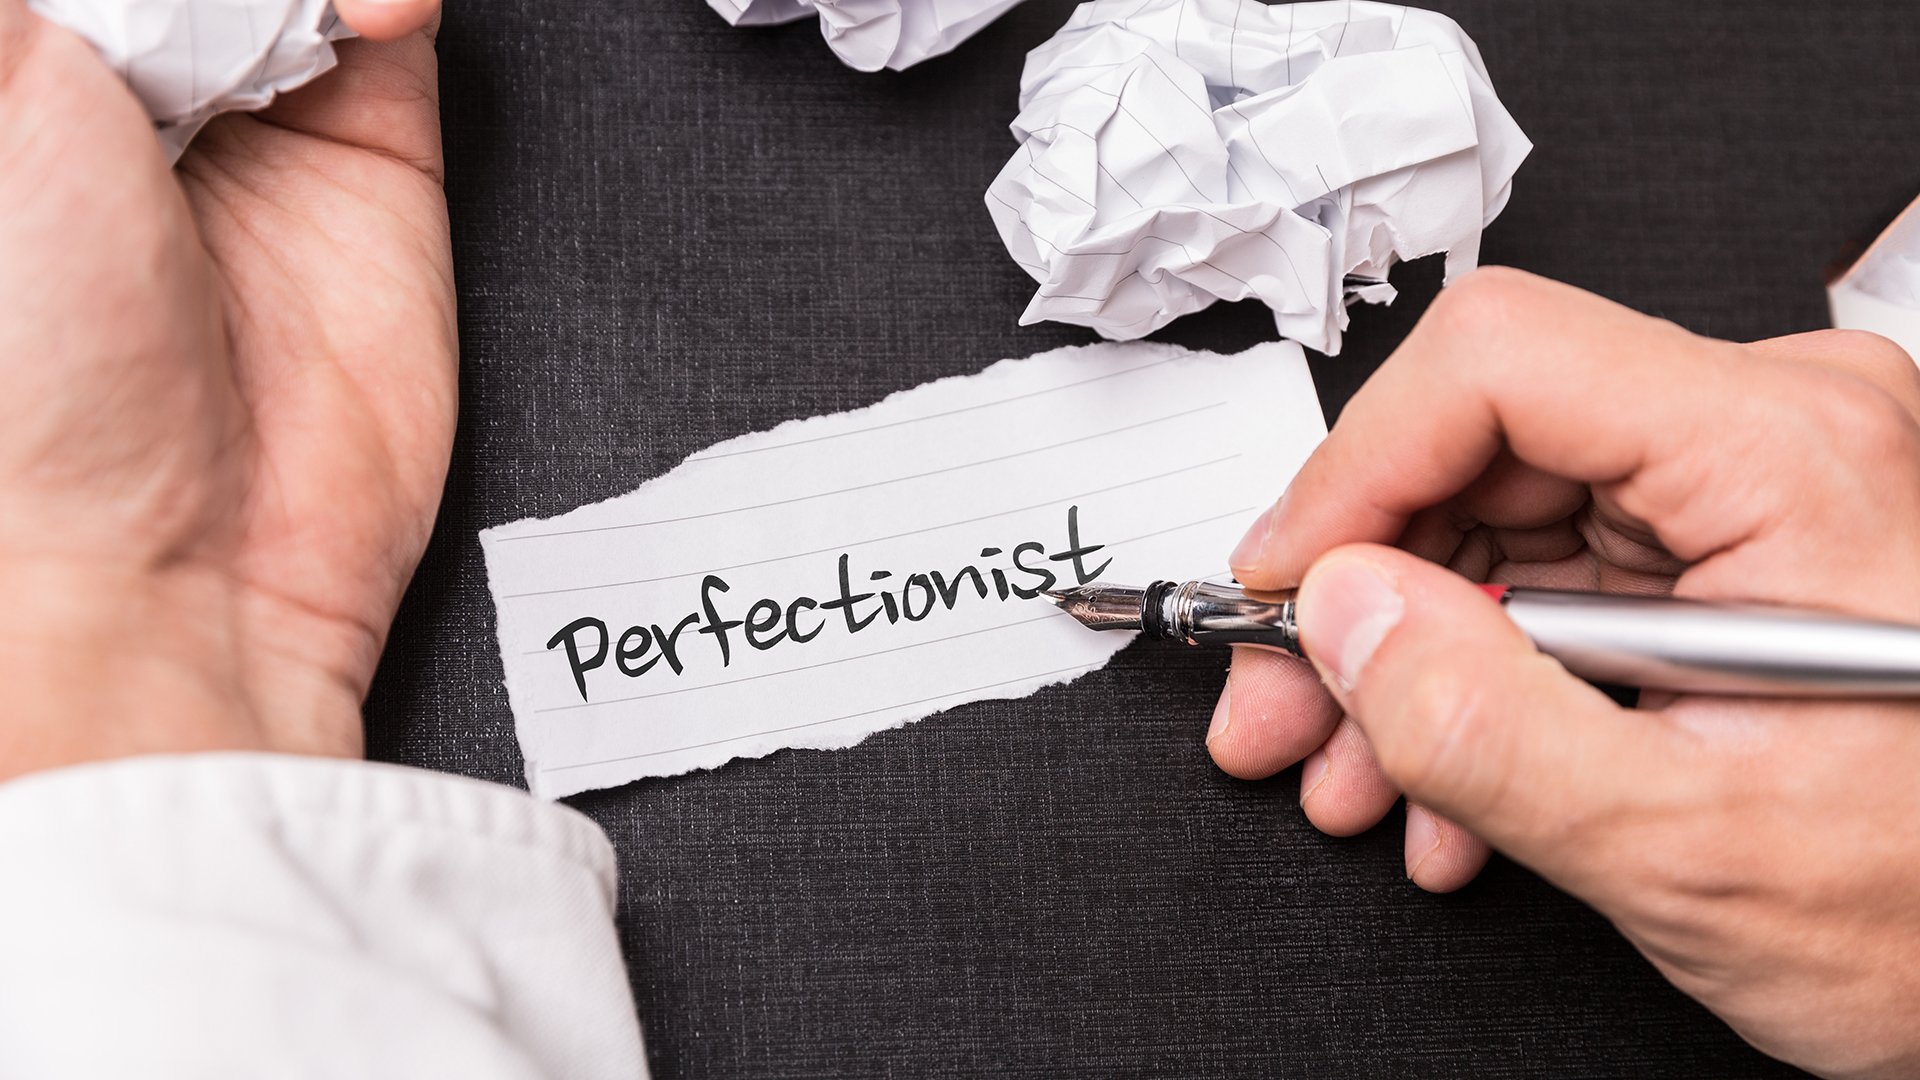 Top tips for overcoming perfectionism